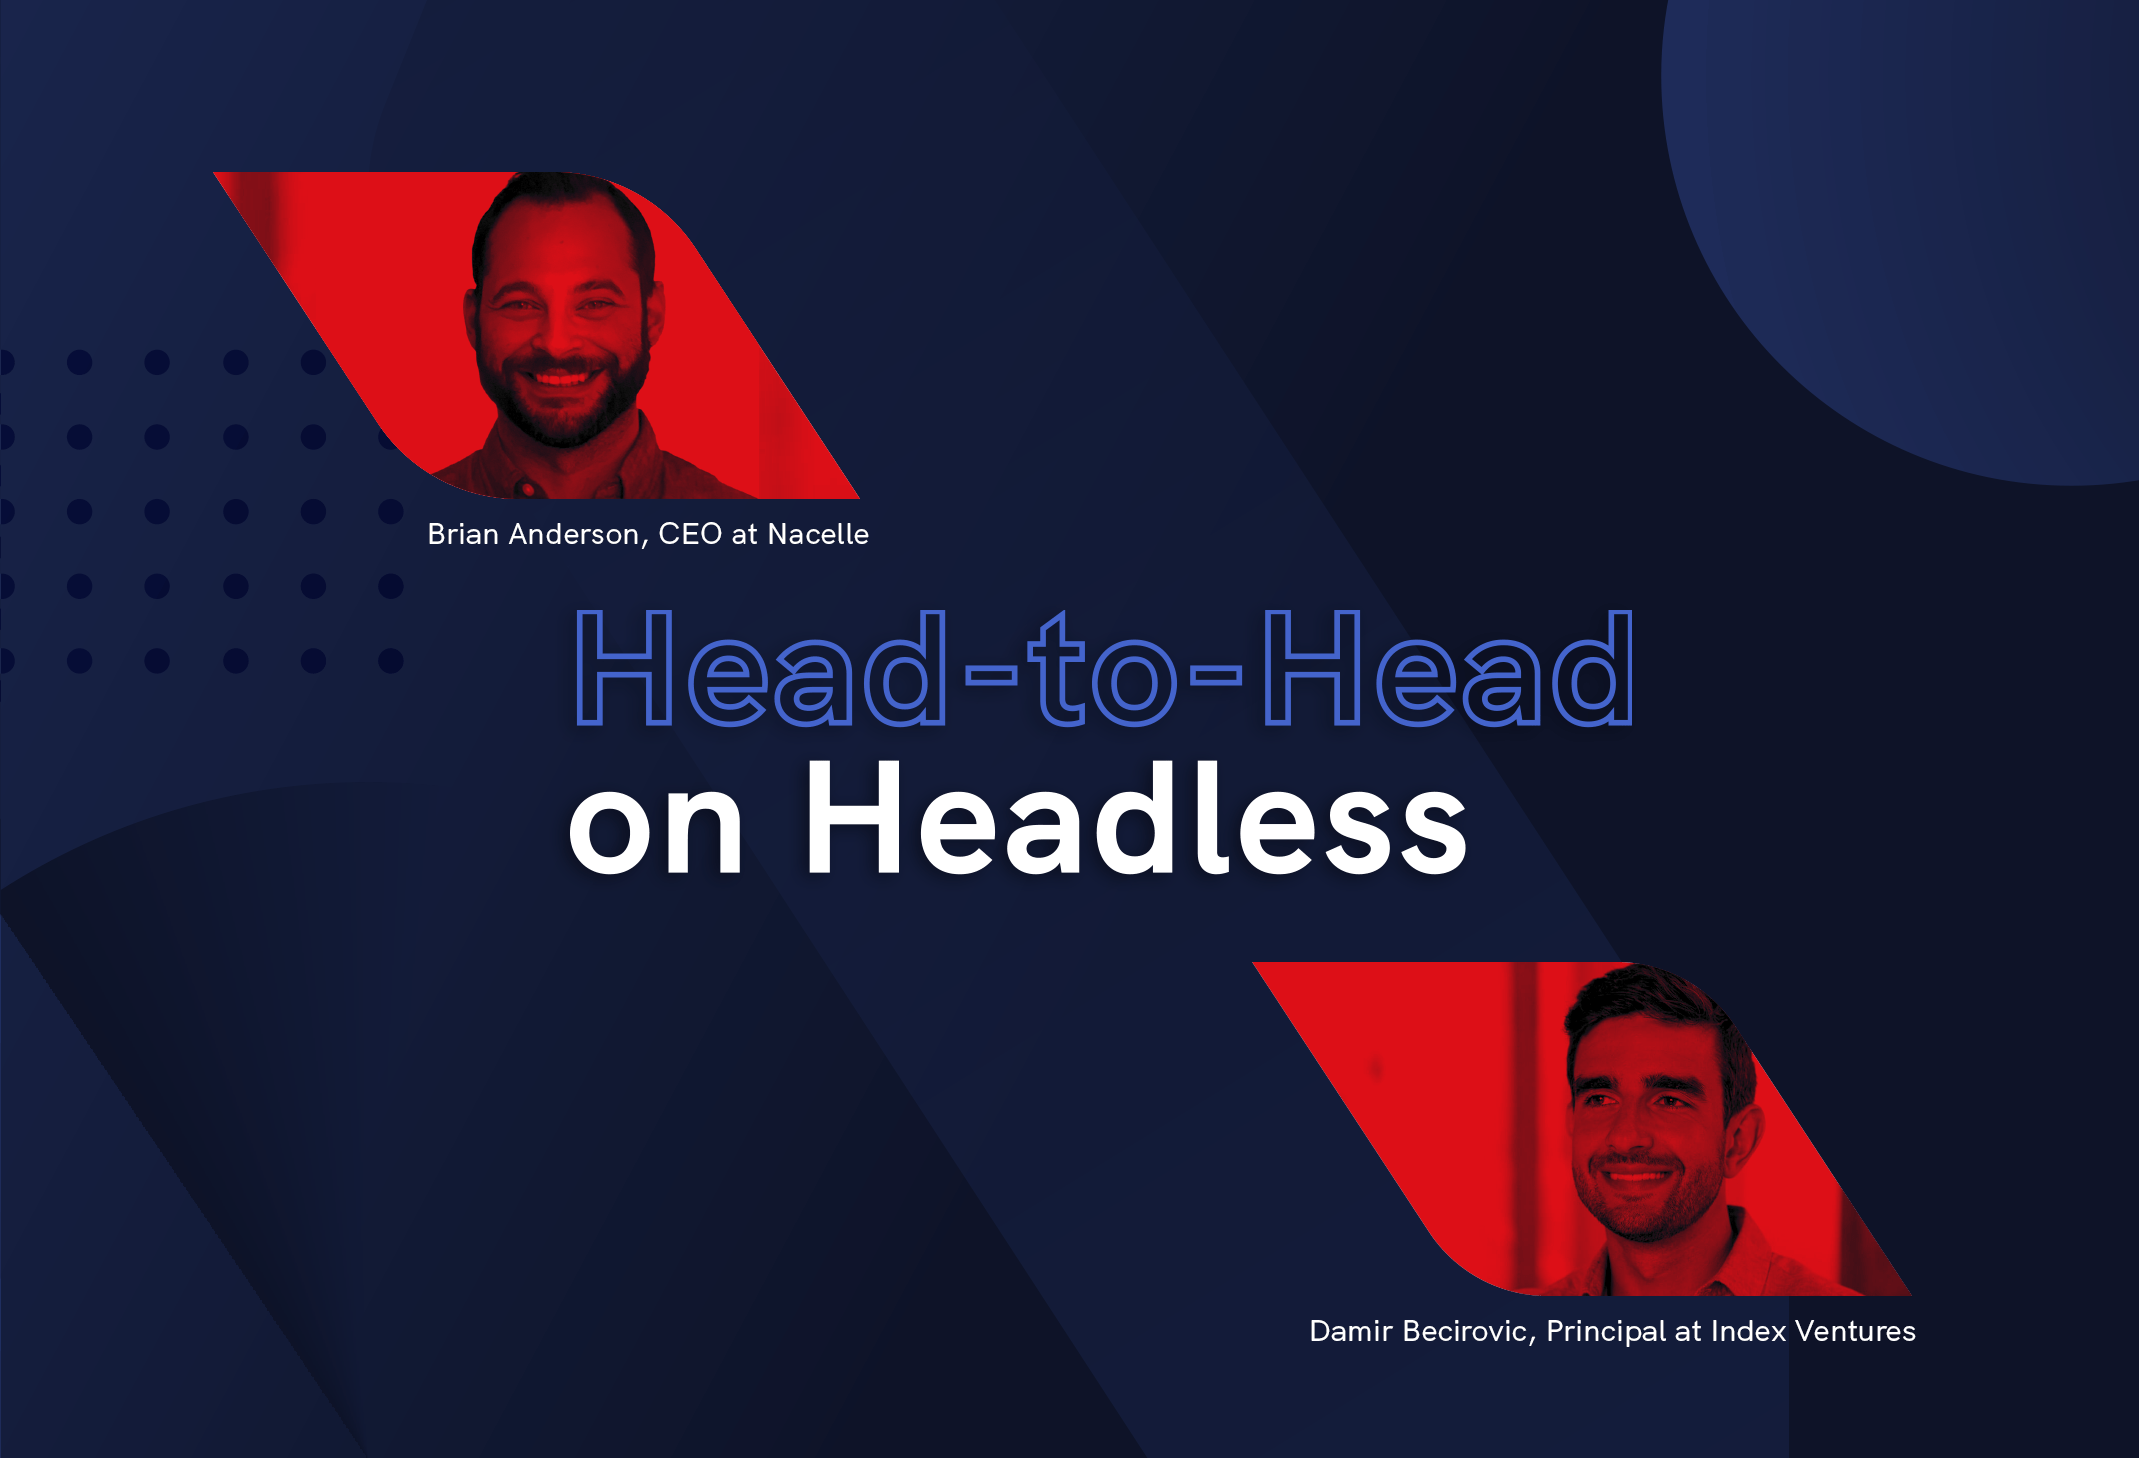  Highlights from head-to-head on headless with Damir Becirovic 